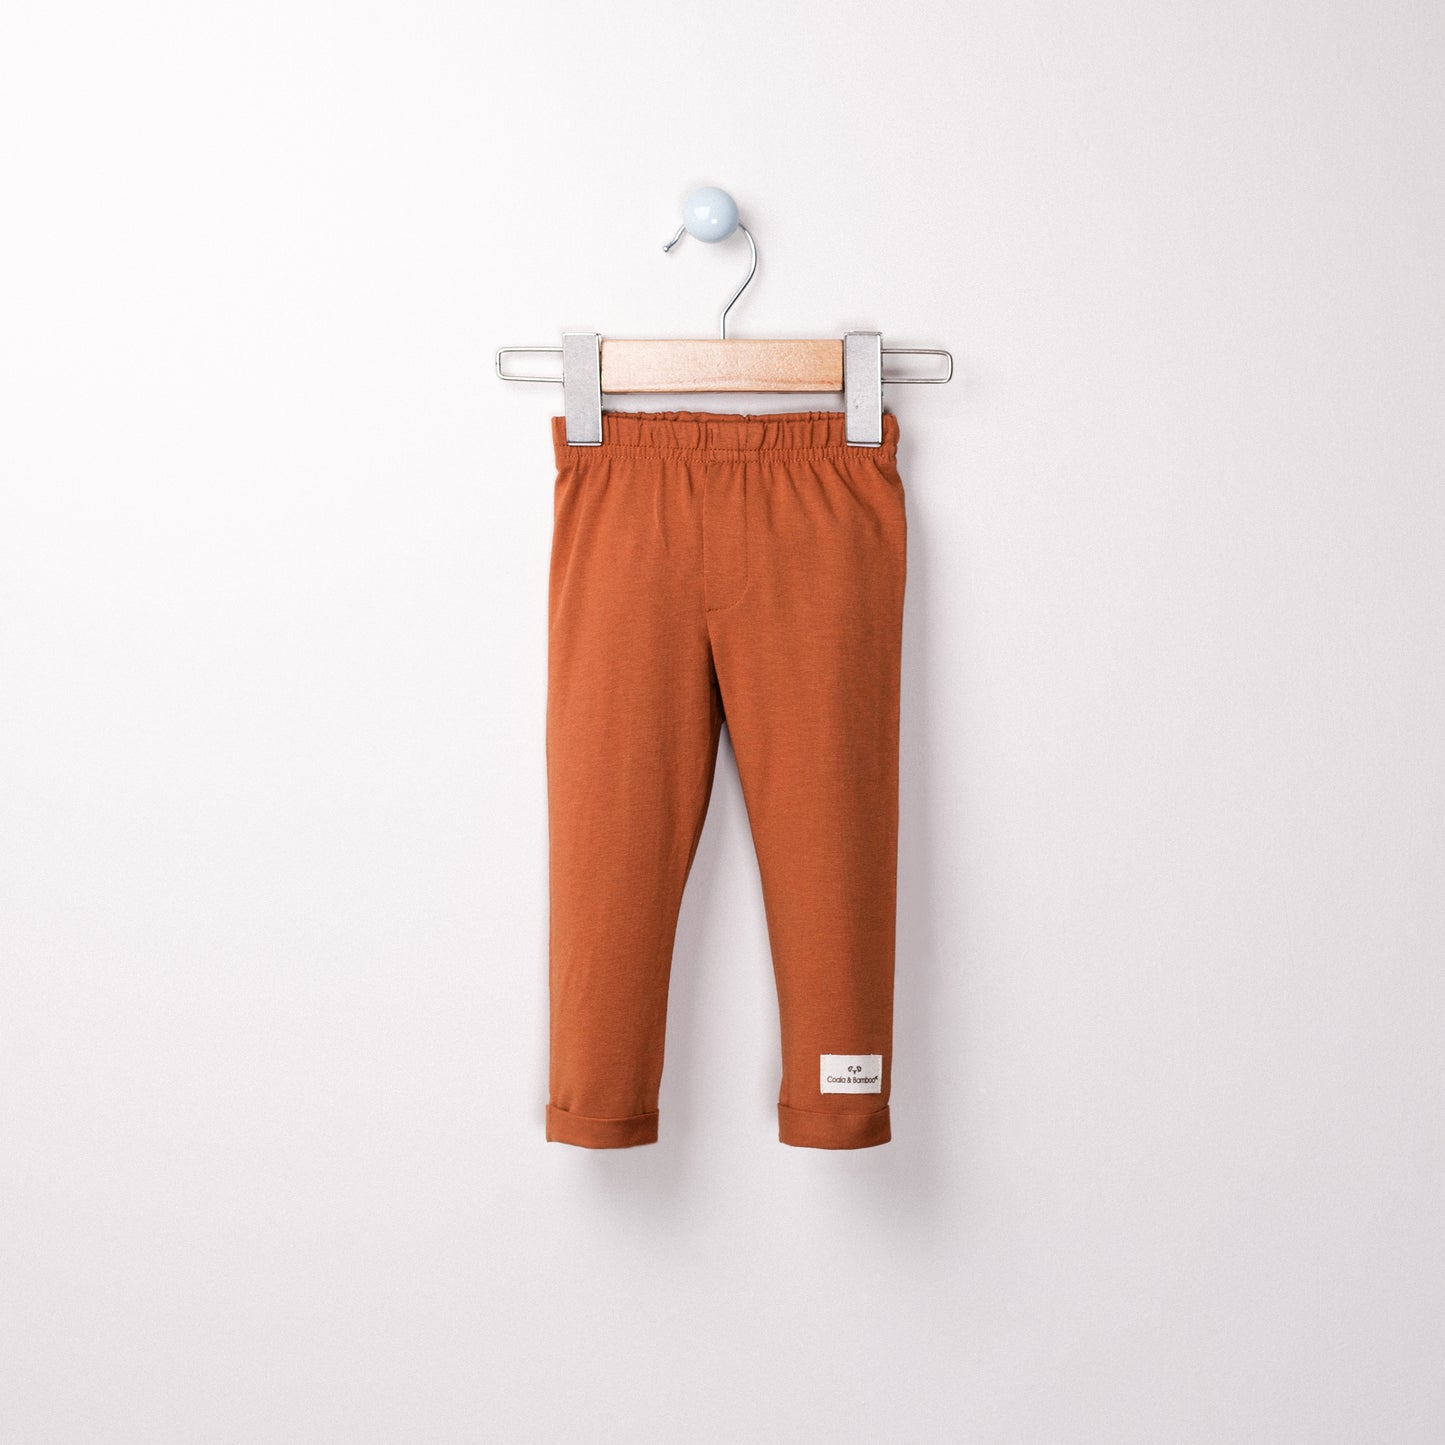 Modal Pants- Aged 3 M to 5 Yrs- Colored Cinnamon